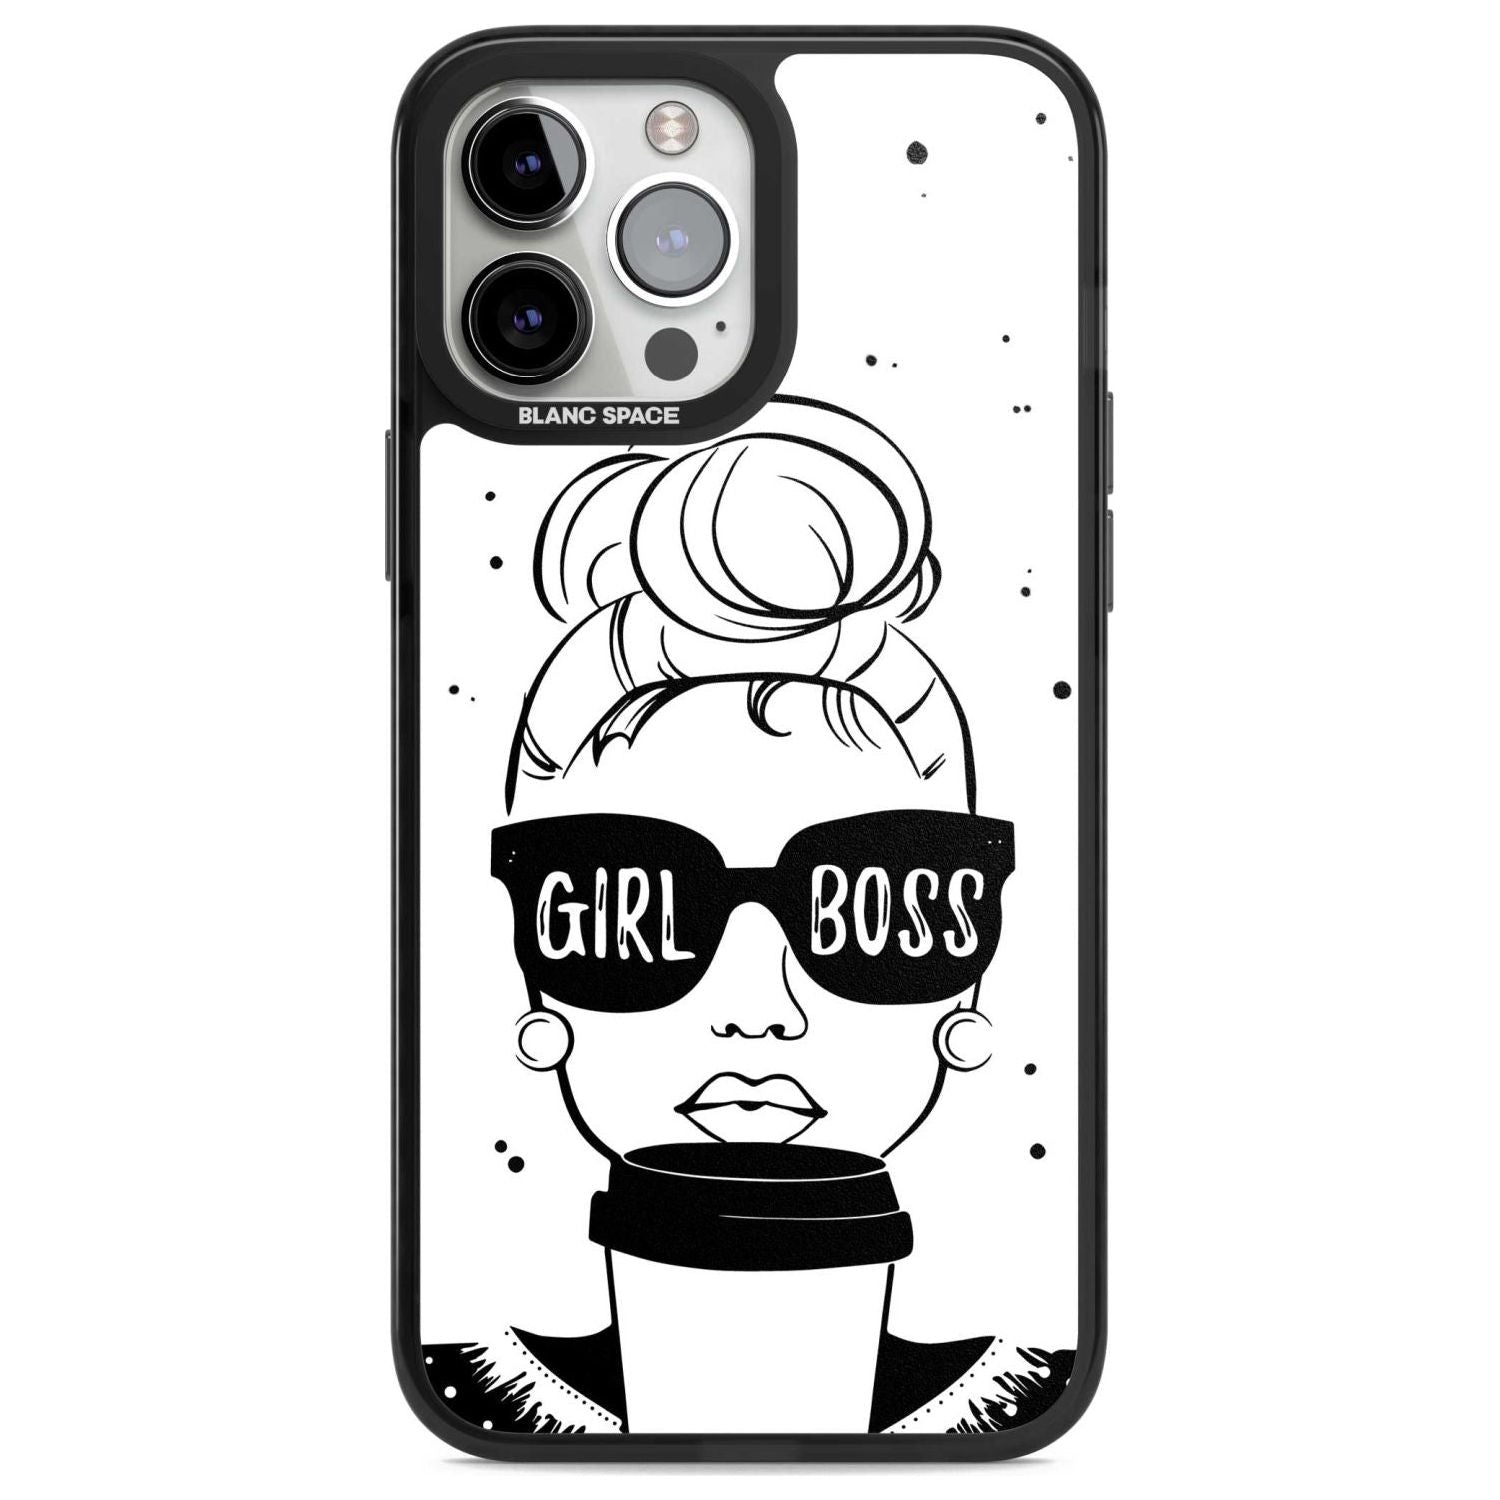 Girl Boss Phone Case iPhone 13 Pro Max / Magsafe Black Impact Case Blanc Space